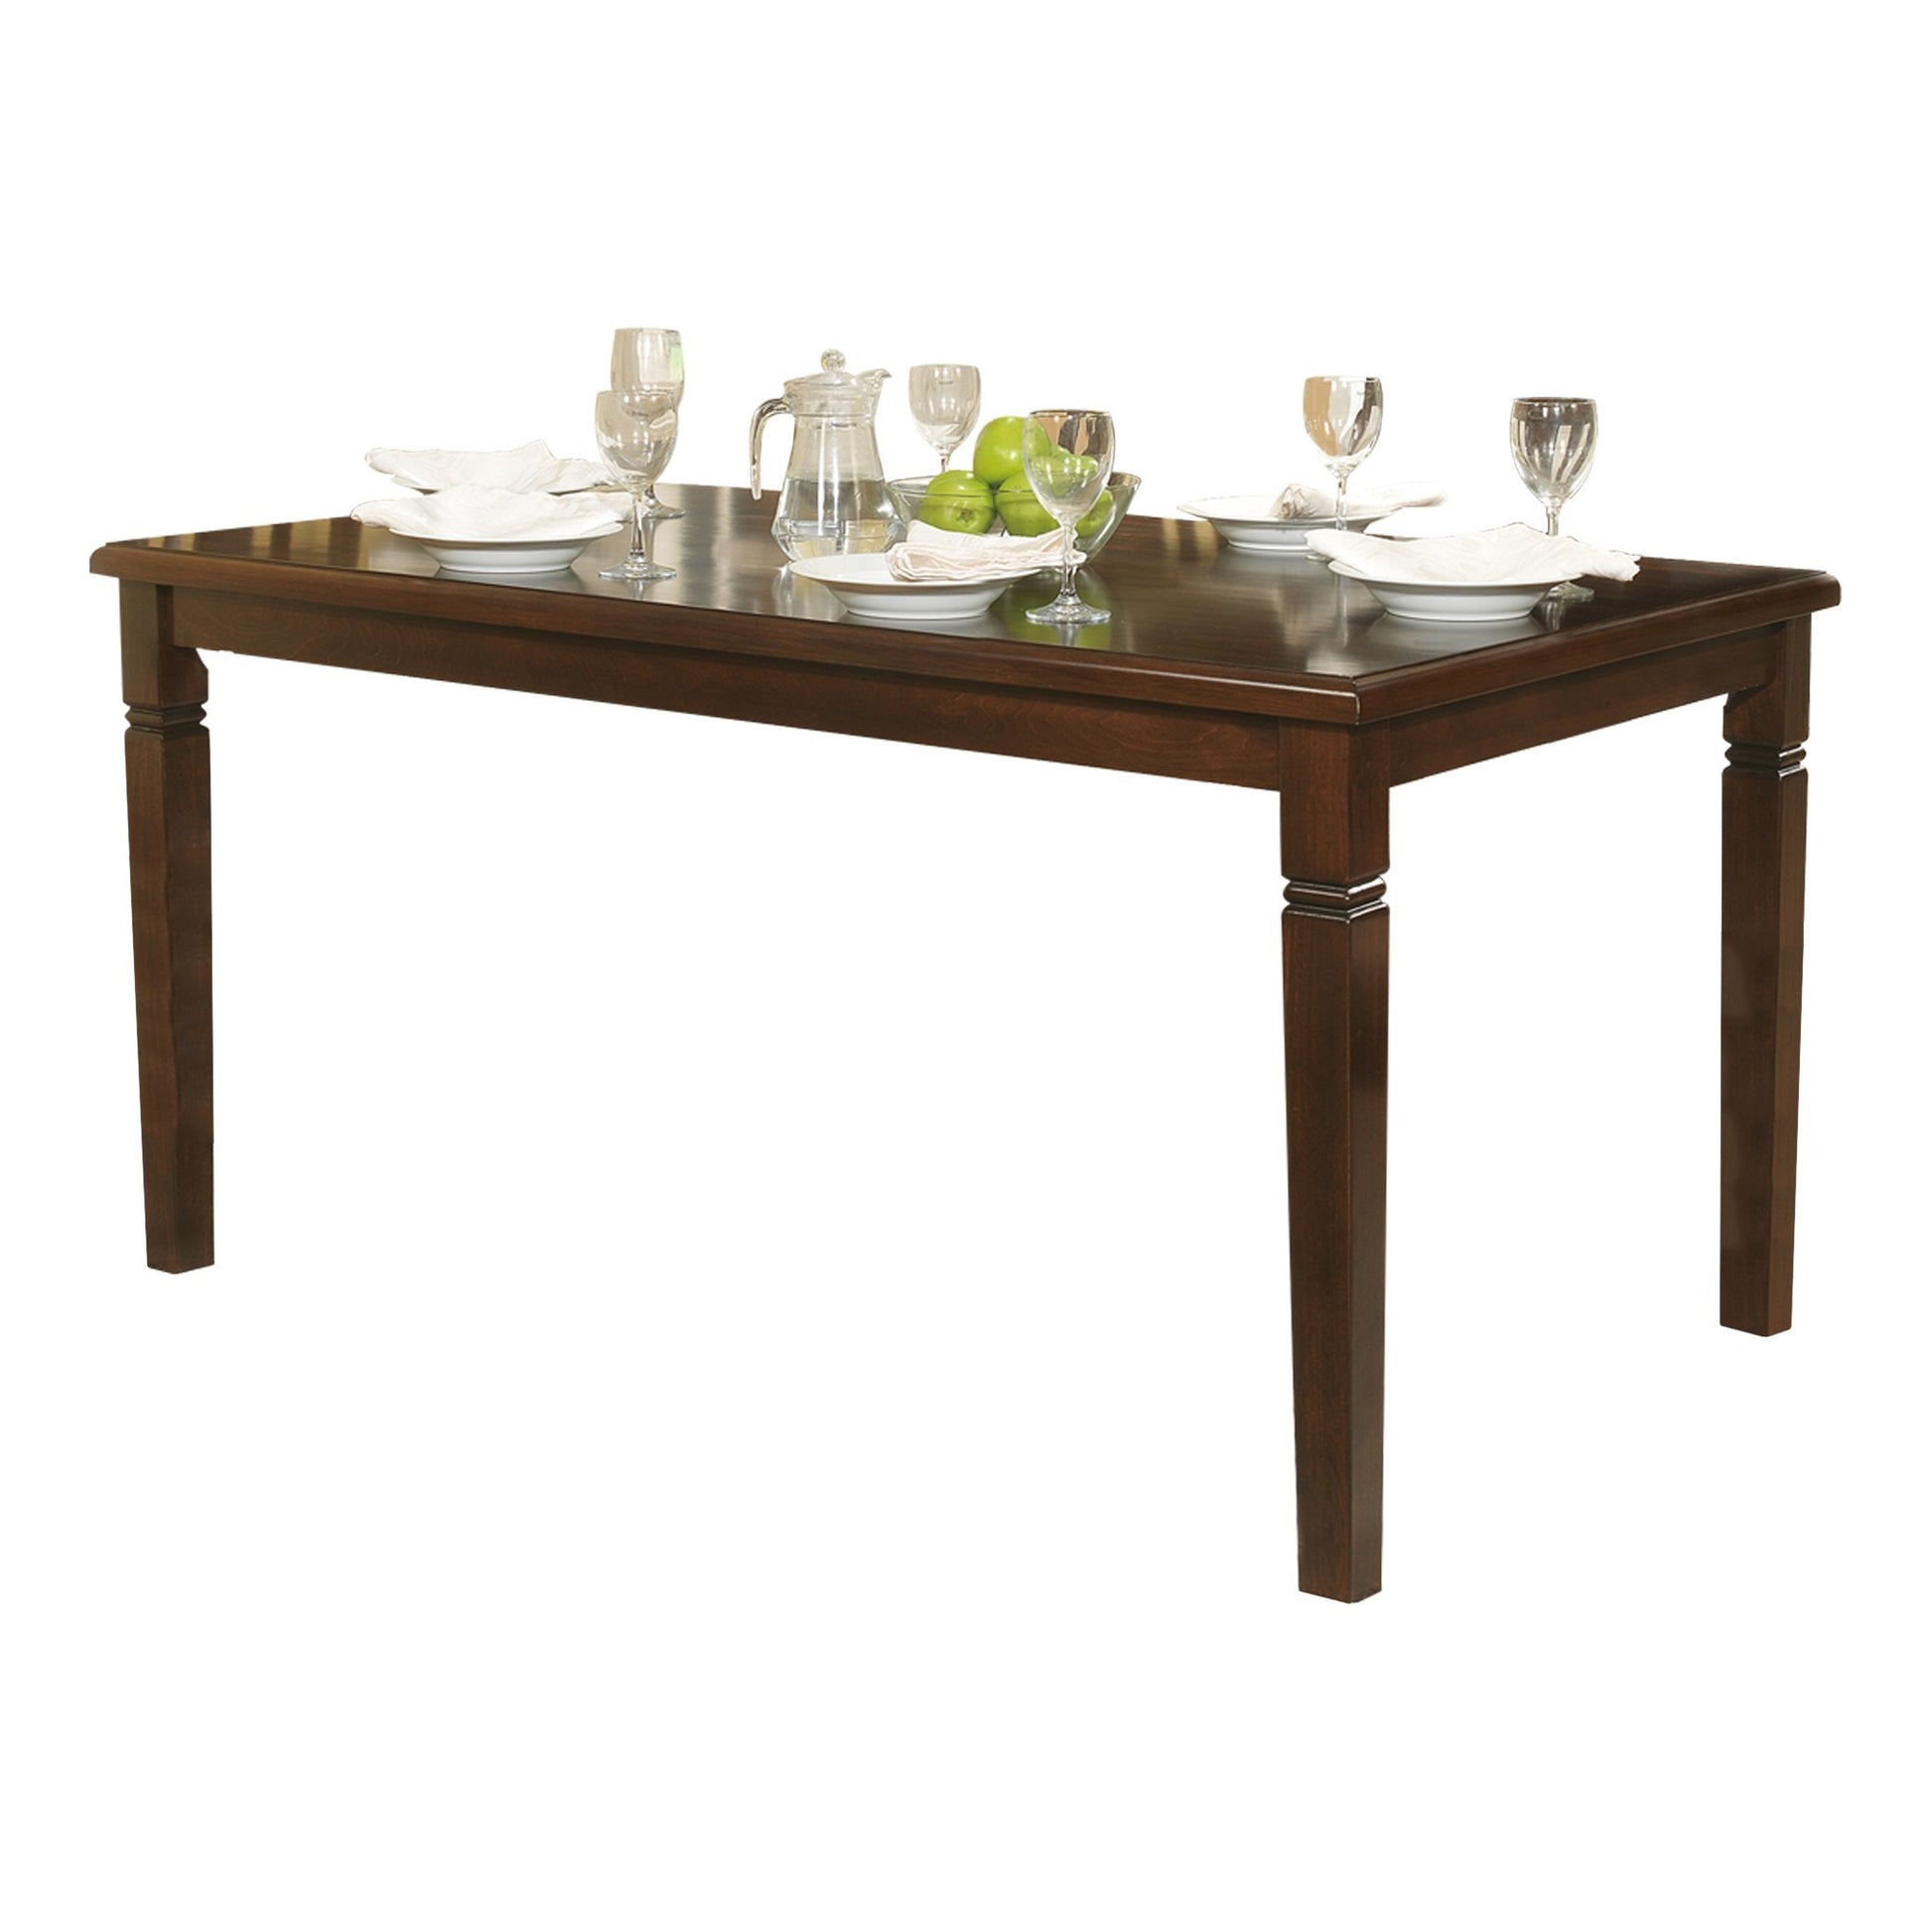 Espresso Finish Transitional Style 1pc Dining Table espresso-dining room-transitional-wood